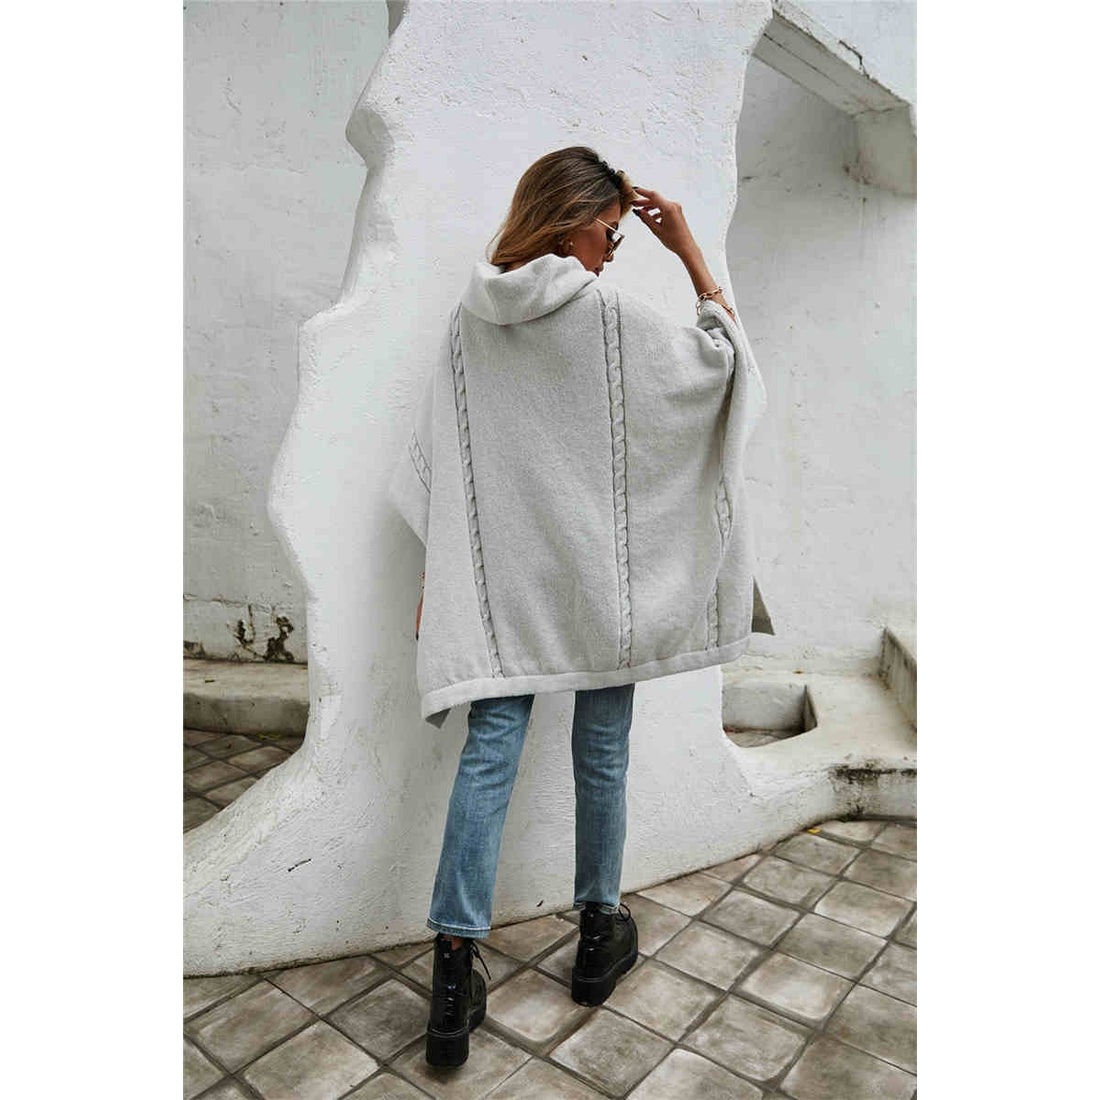 Cable Knit Poncho Sweater- Gray